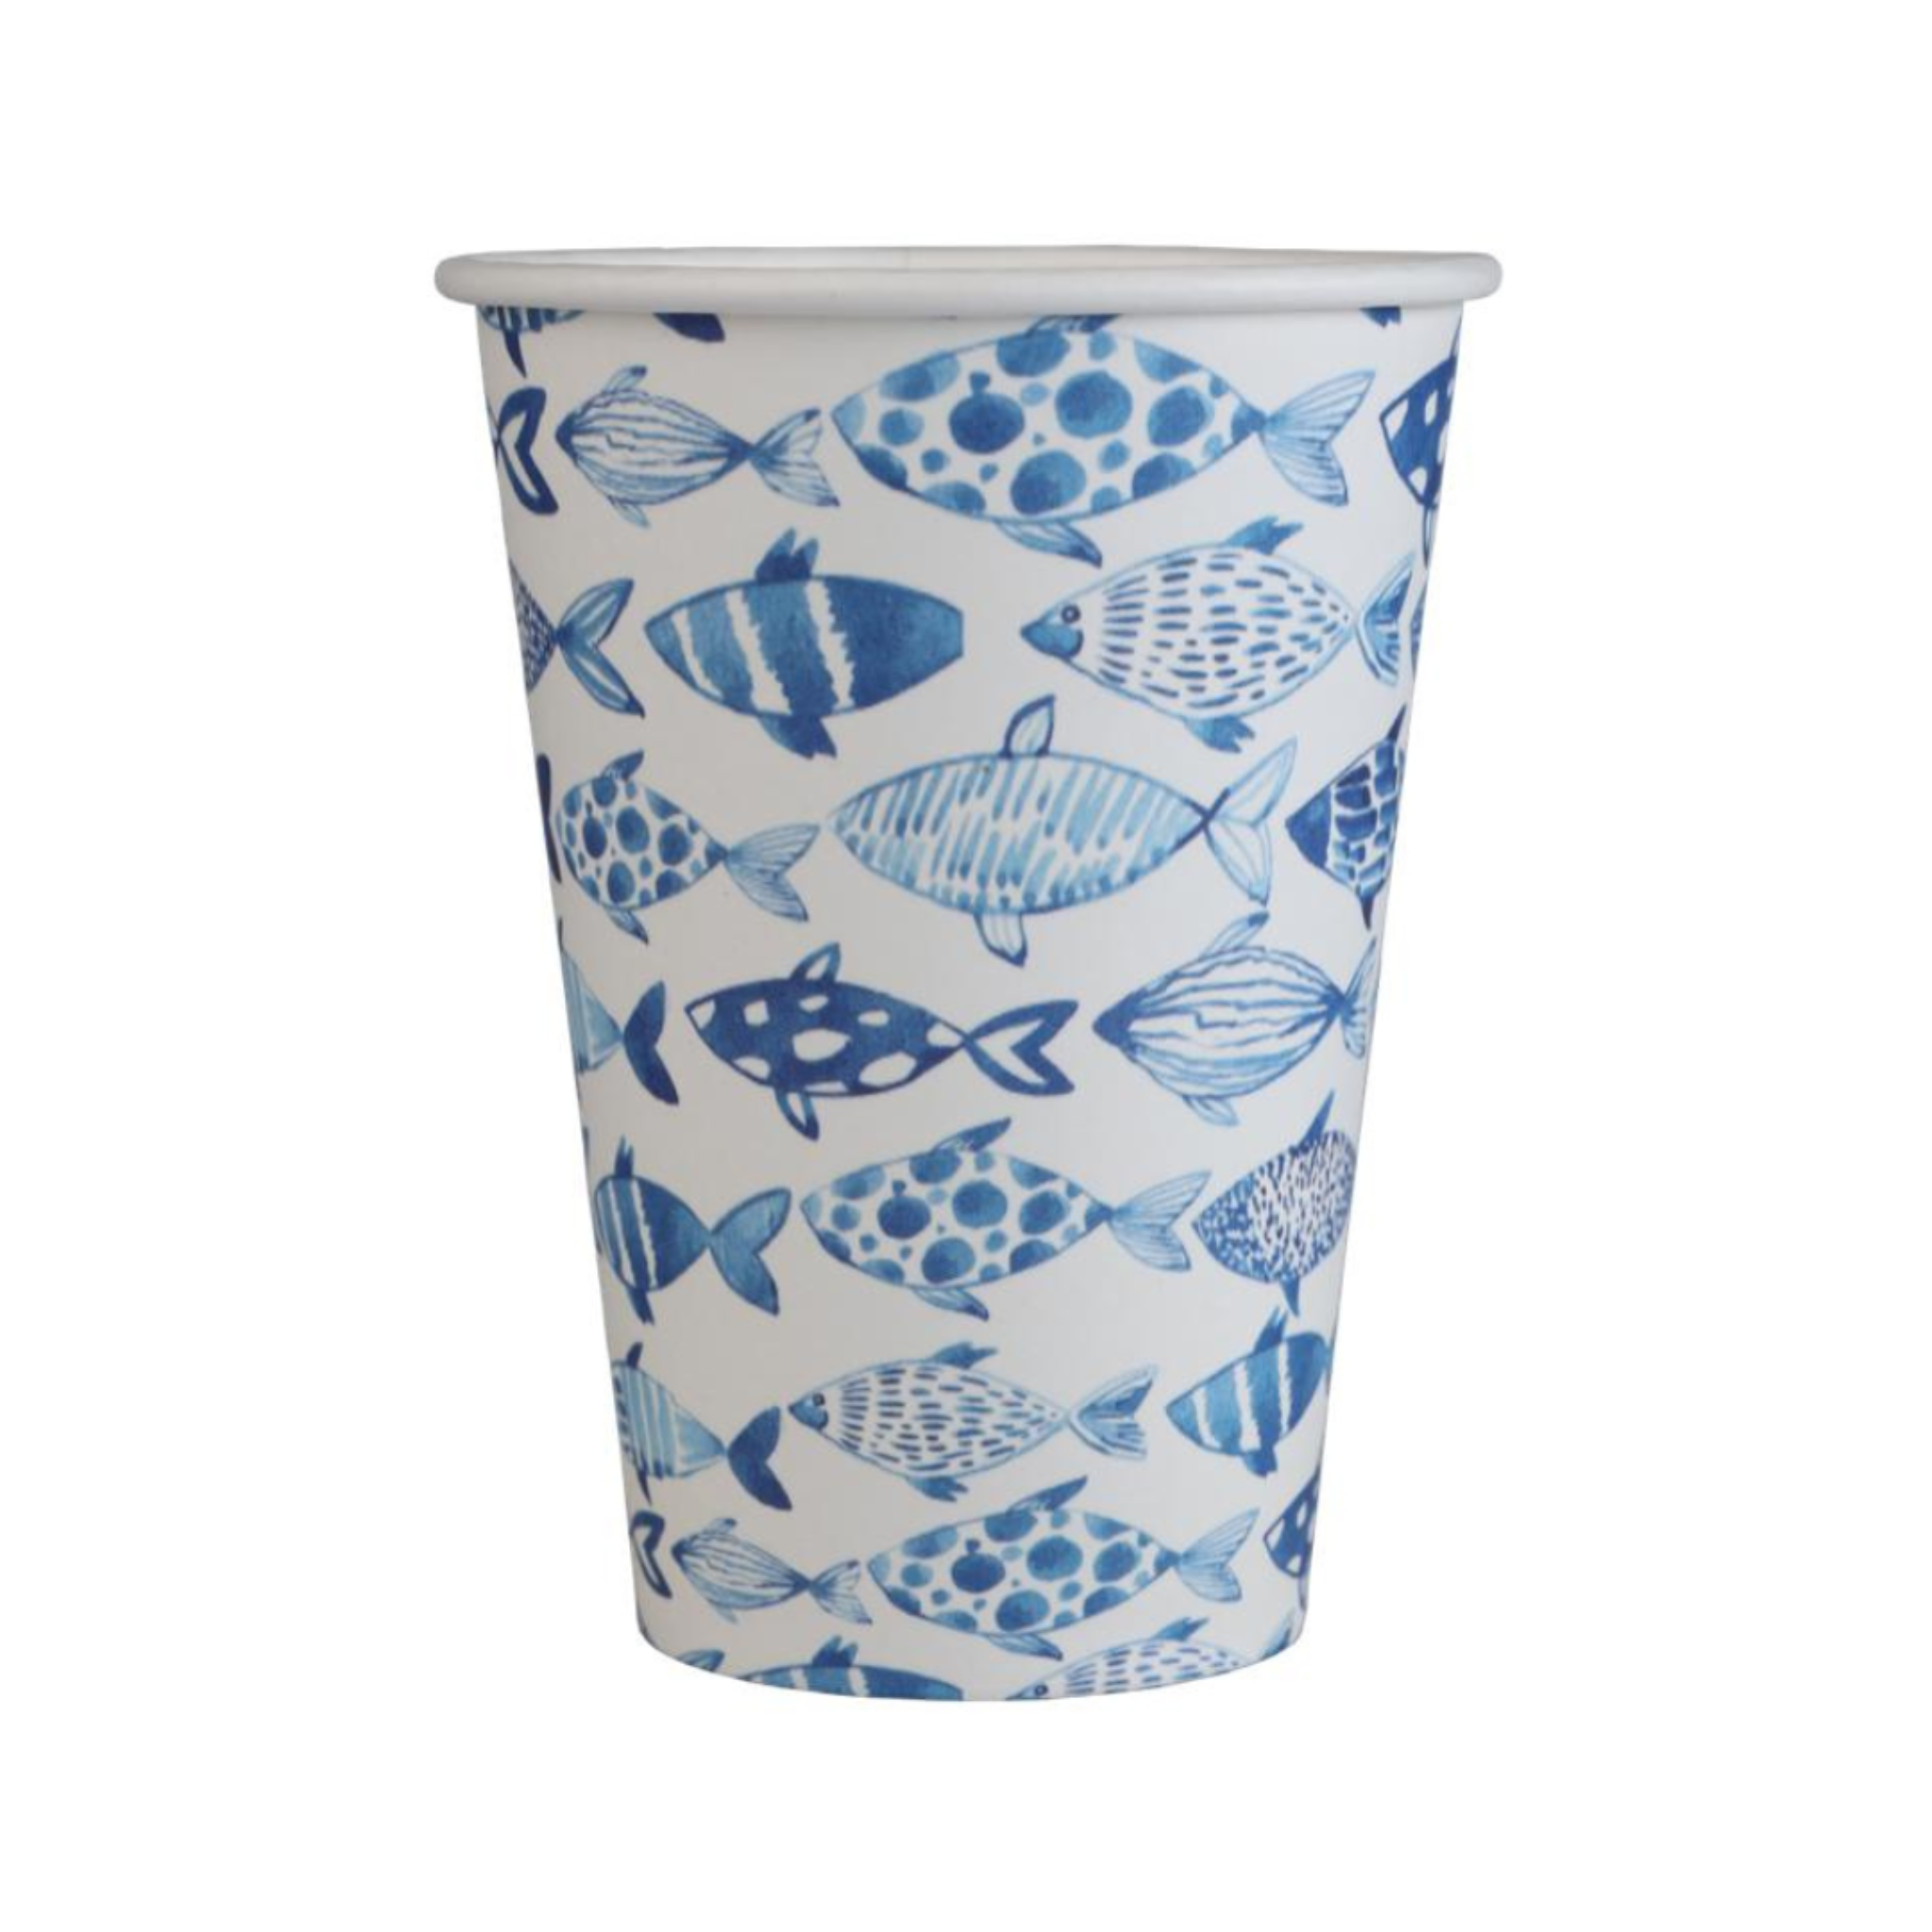 200ml plastic-free paper cups with fish and anchor prints